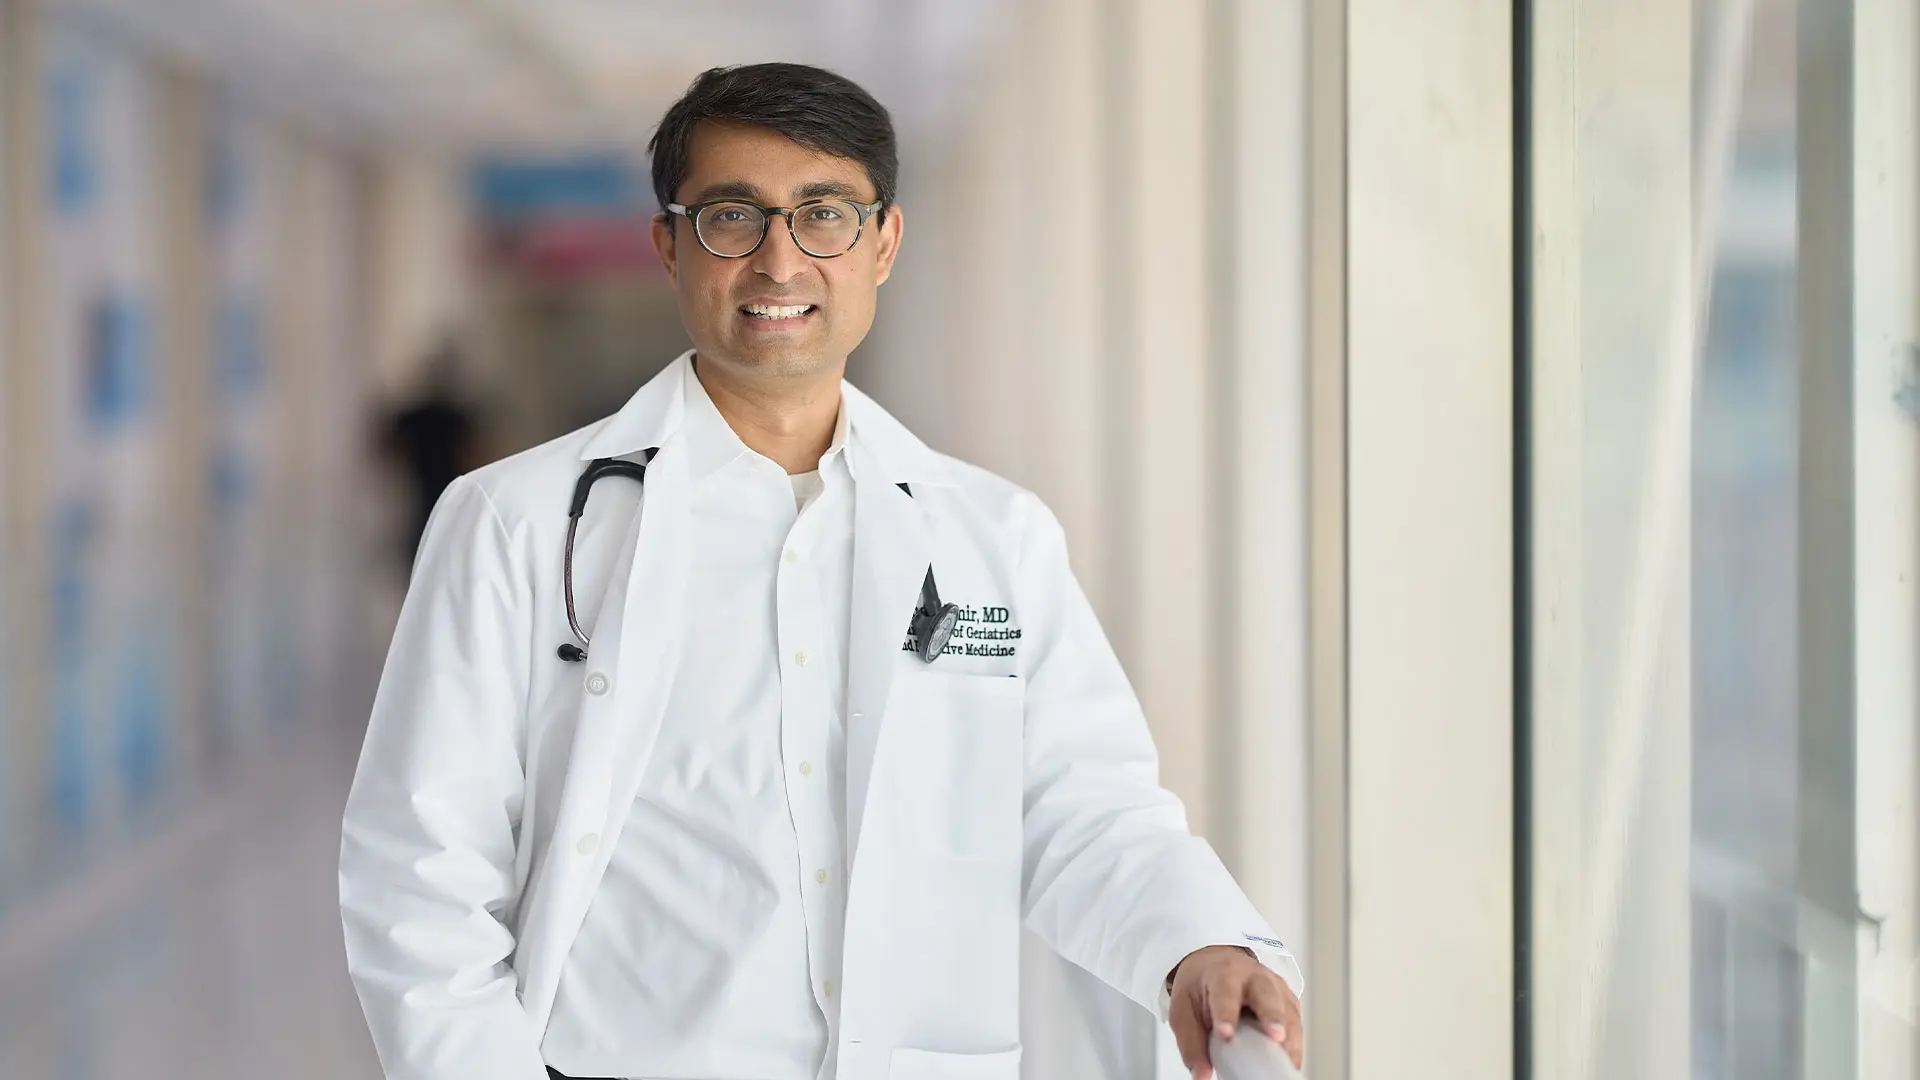 The new initiative "is a true partnership between the primary service and the geriatrics team," says Omar Amir, MD, MS, Assistant Professor, Brookdale Department of Geriatrics and Palliative Medicine. 